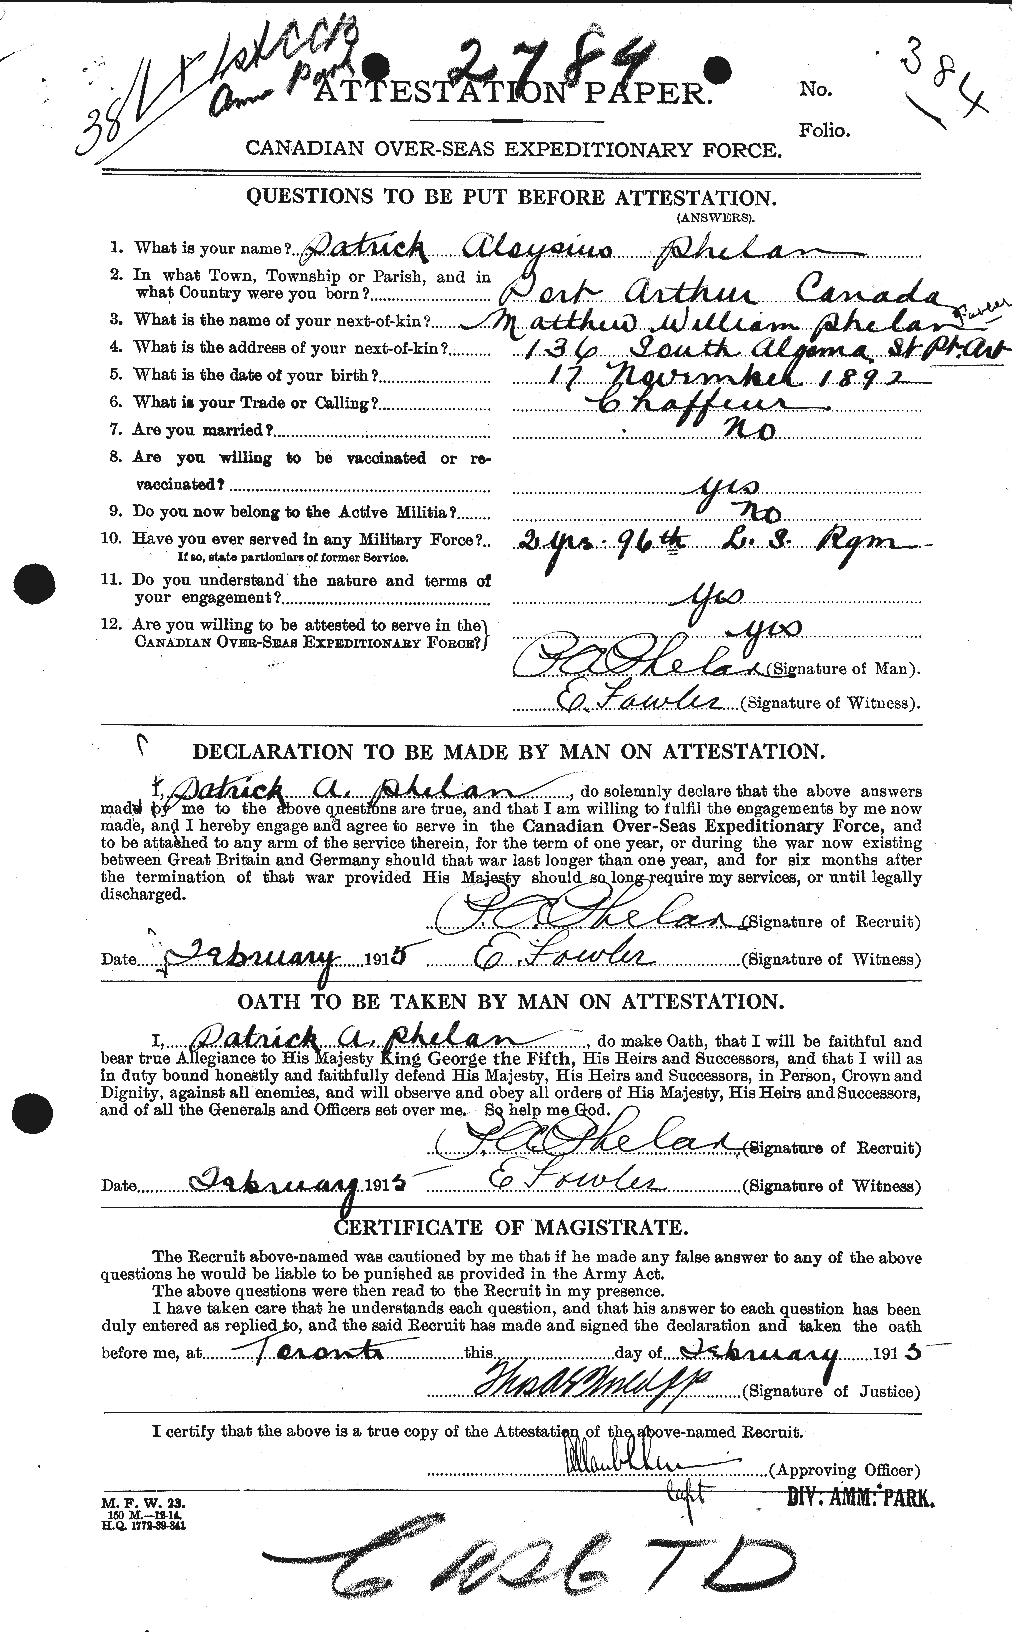 Personnel Records of the First World War - CEF 576963a